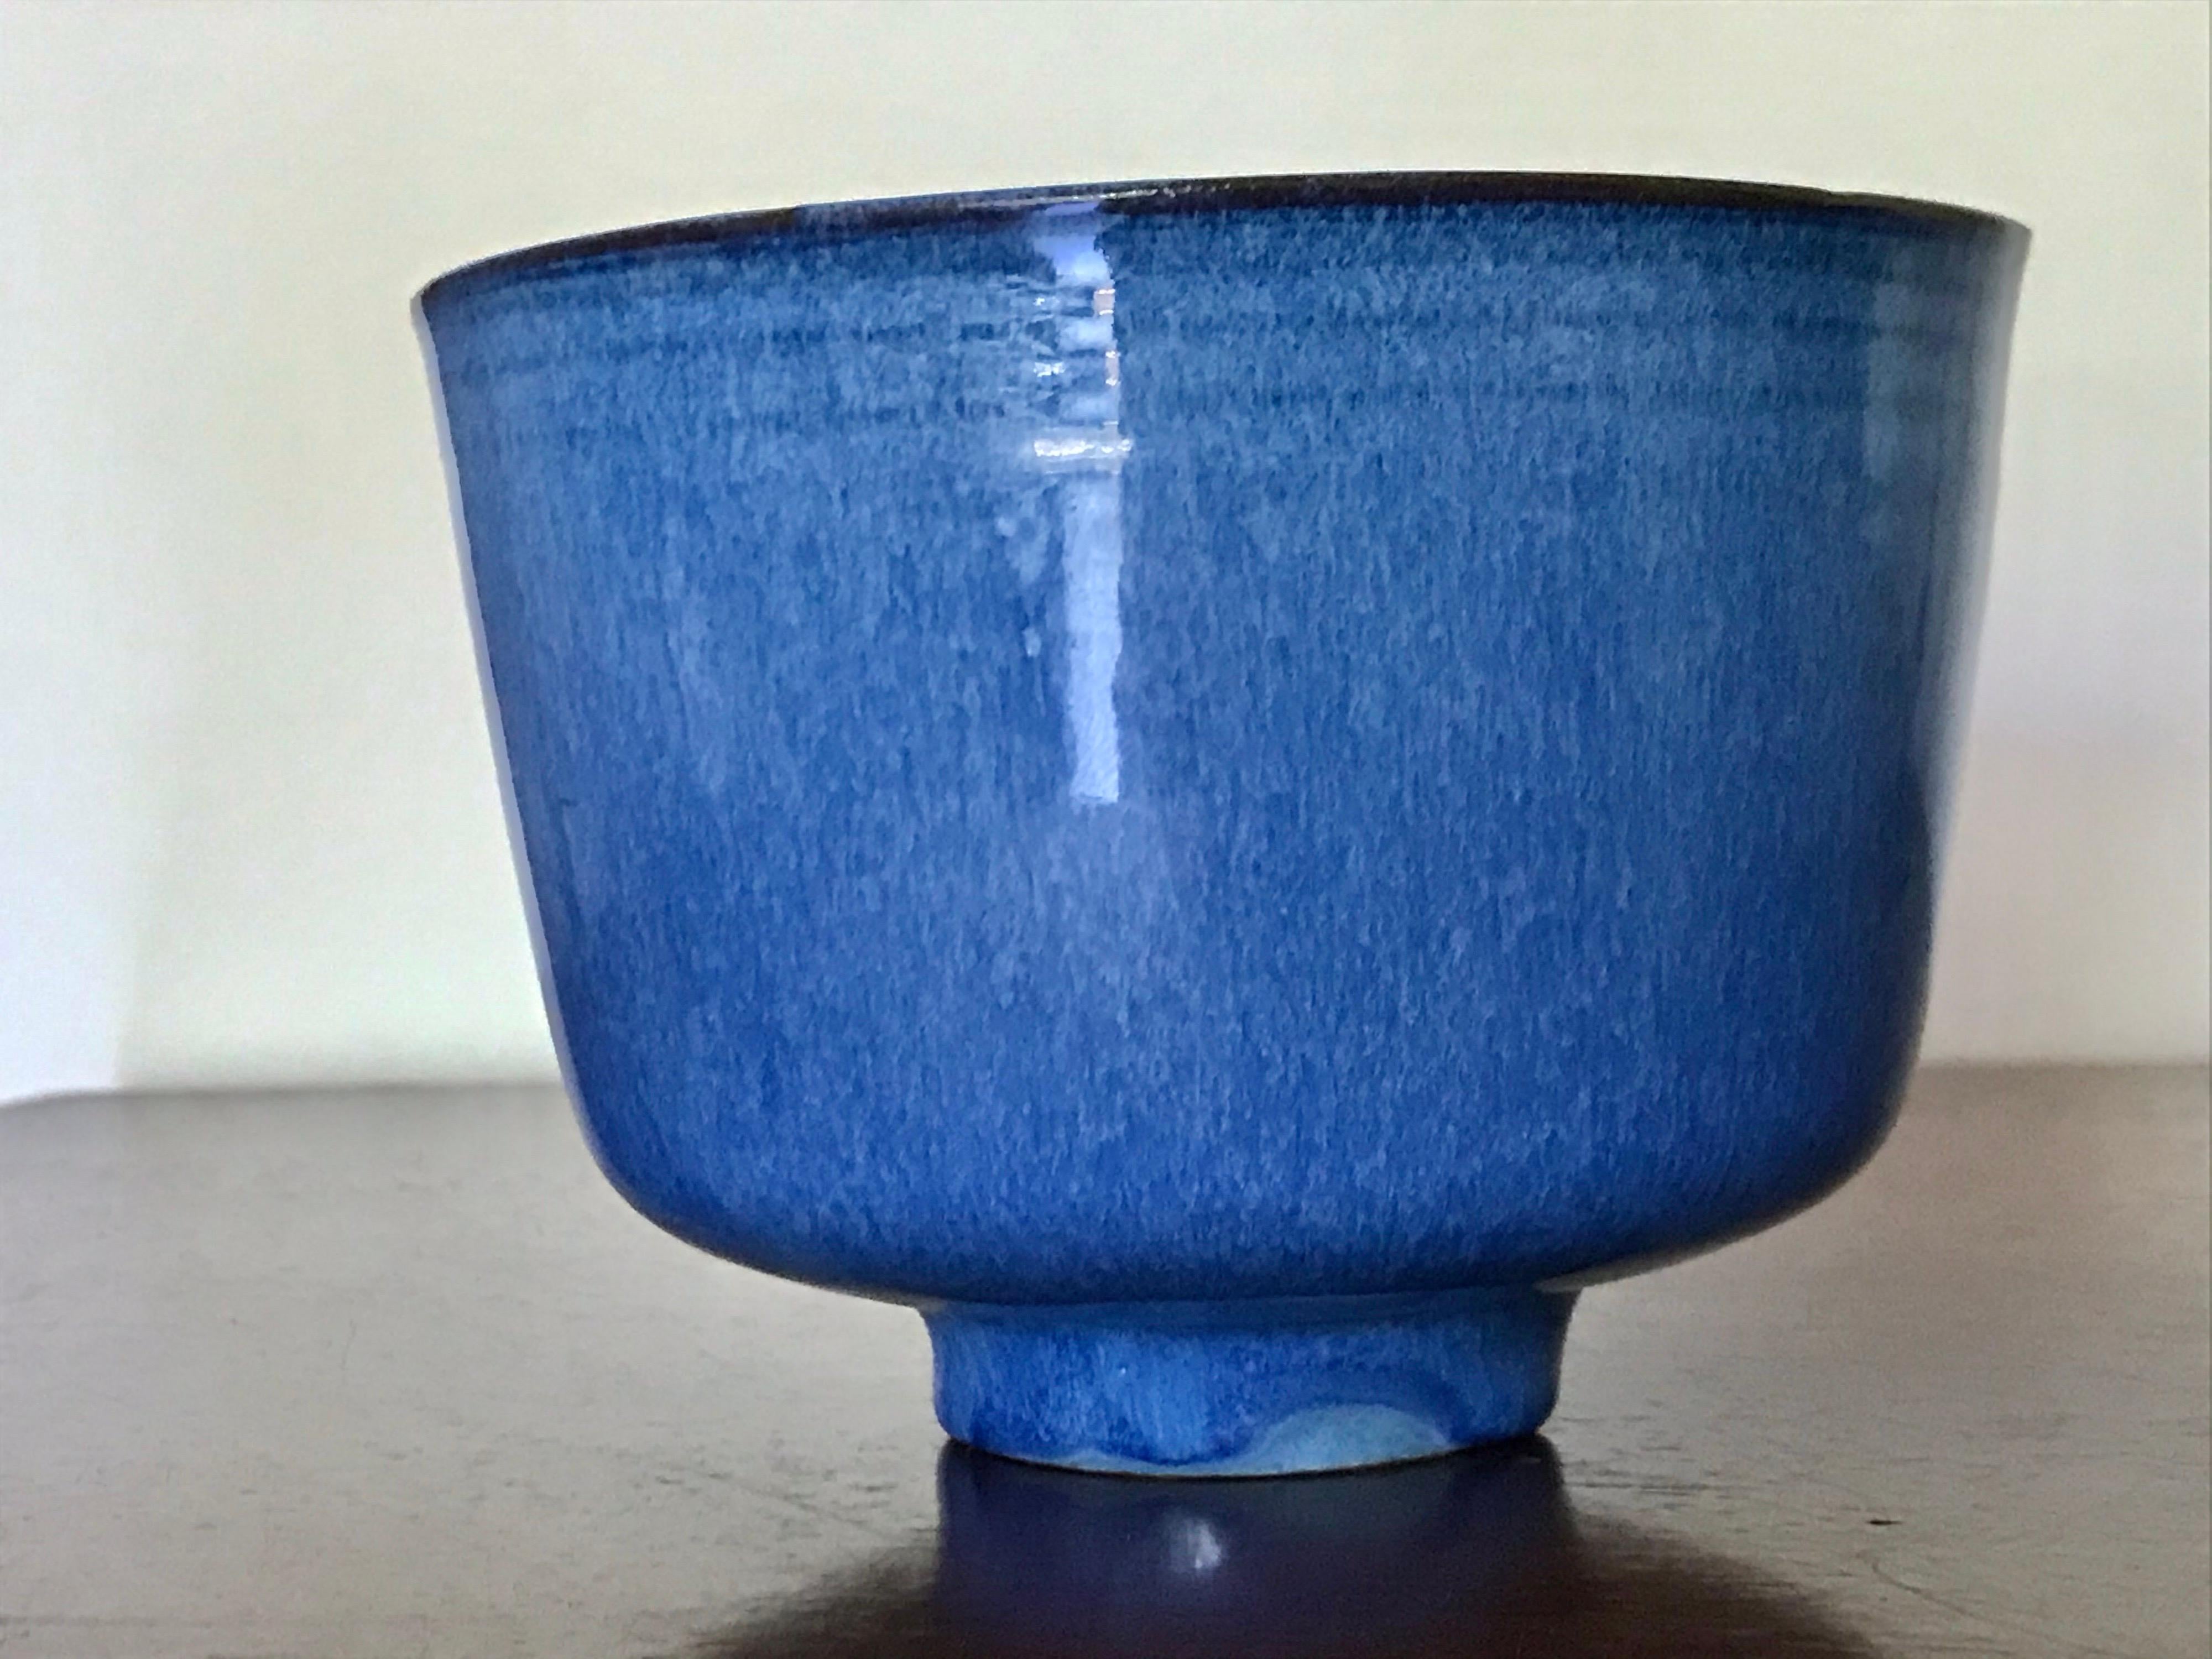 Gertrud + Otto Natzler Studio Pottery Vase Bowl In Excellent Condition For Sale In Los Angeles, CA